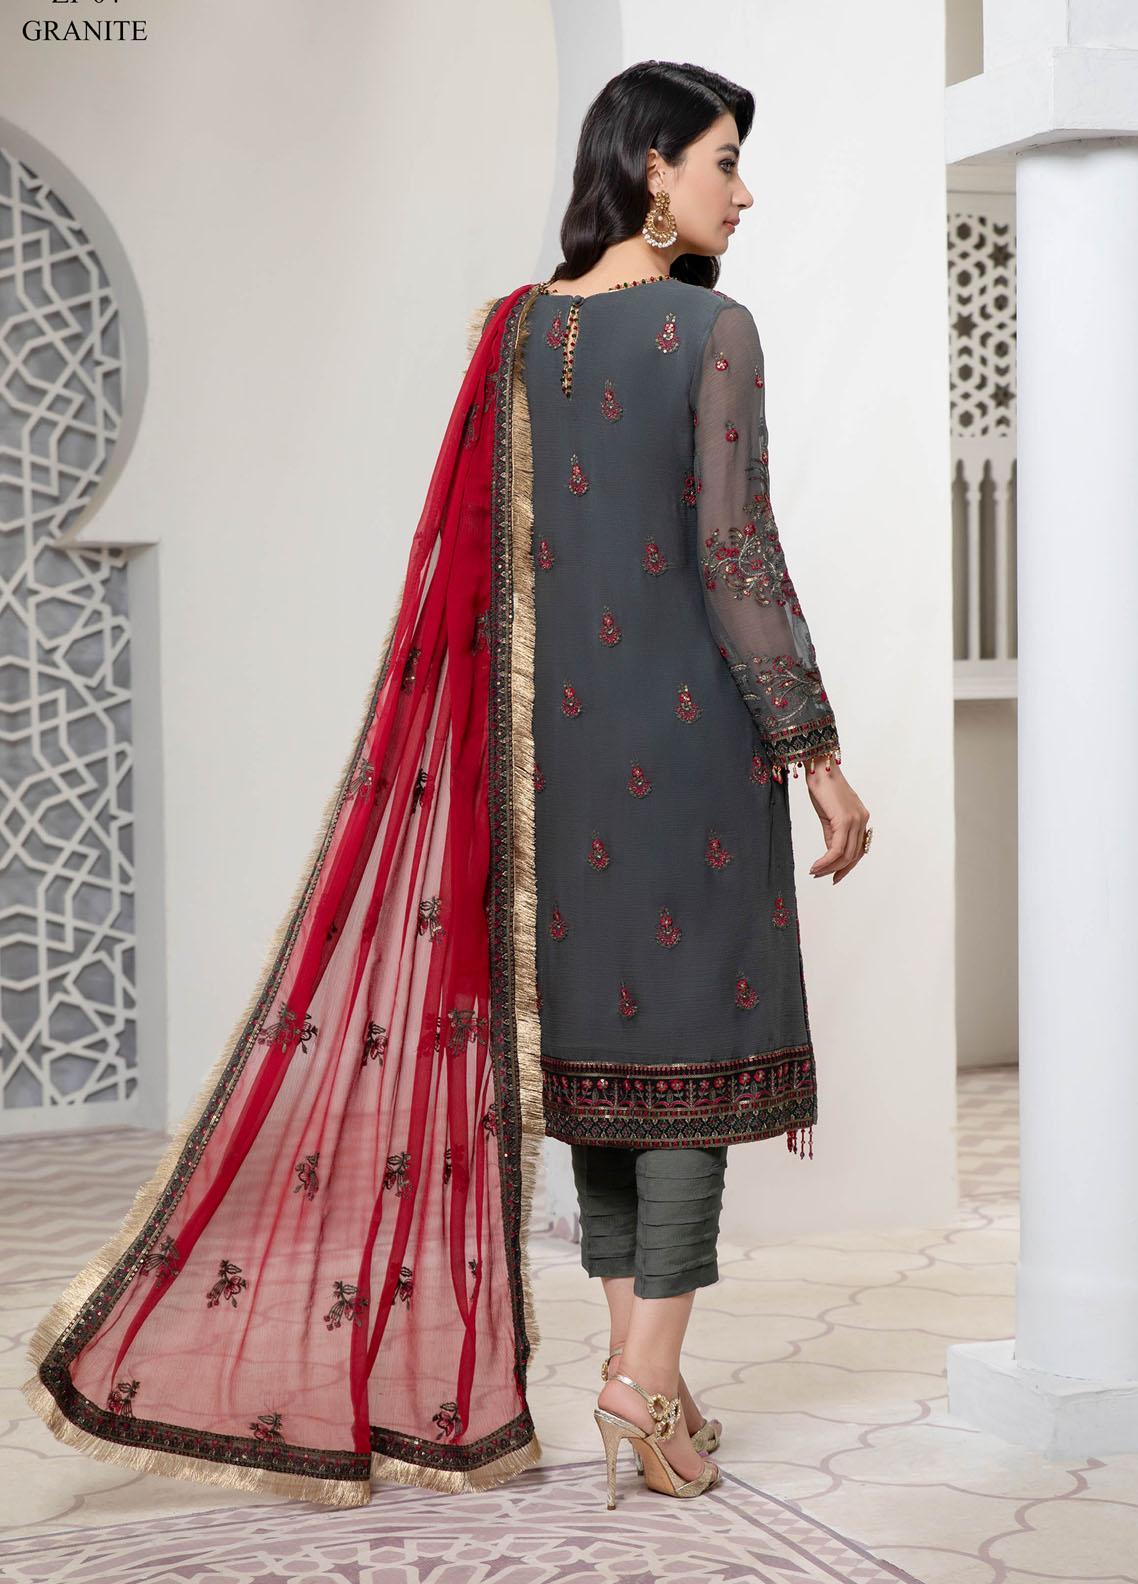 Pareesia by Zarif Embroidered Chiffon Suit Unstitched 3 Piece ZPC22-04 Granite – Luxury Collection